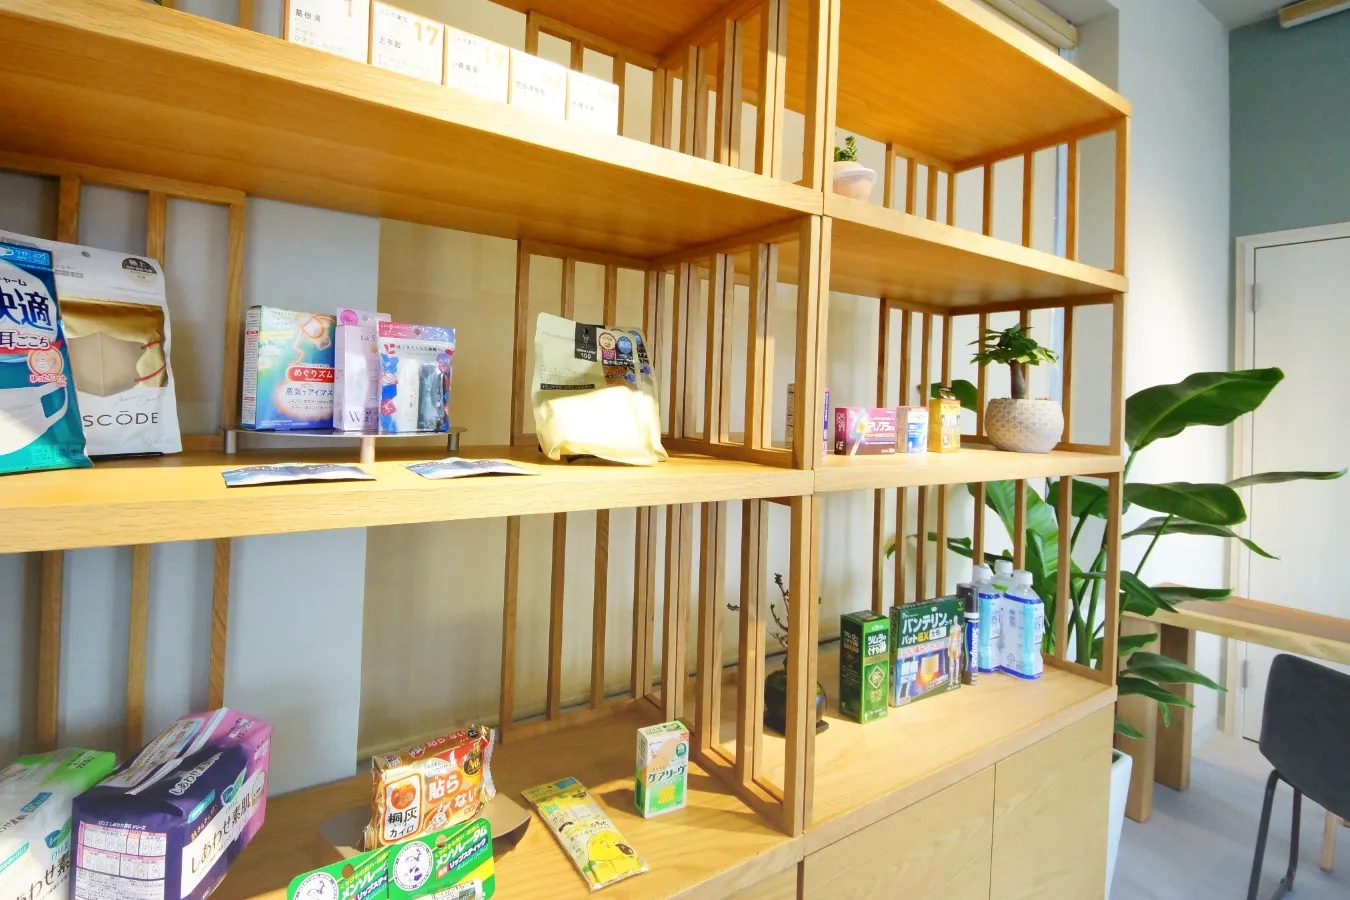 Medicines displayed on the shelves of Lantern Pharmacy